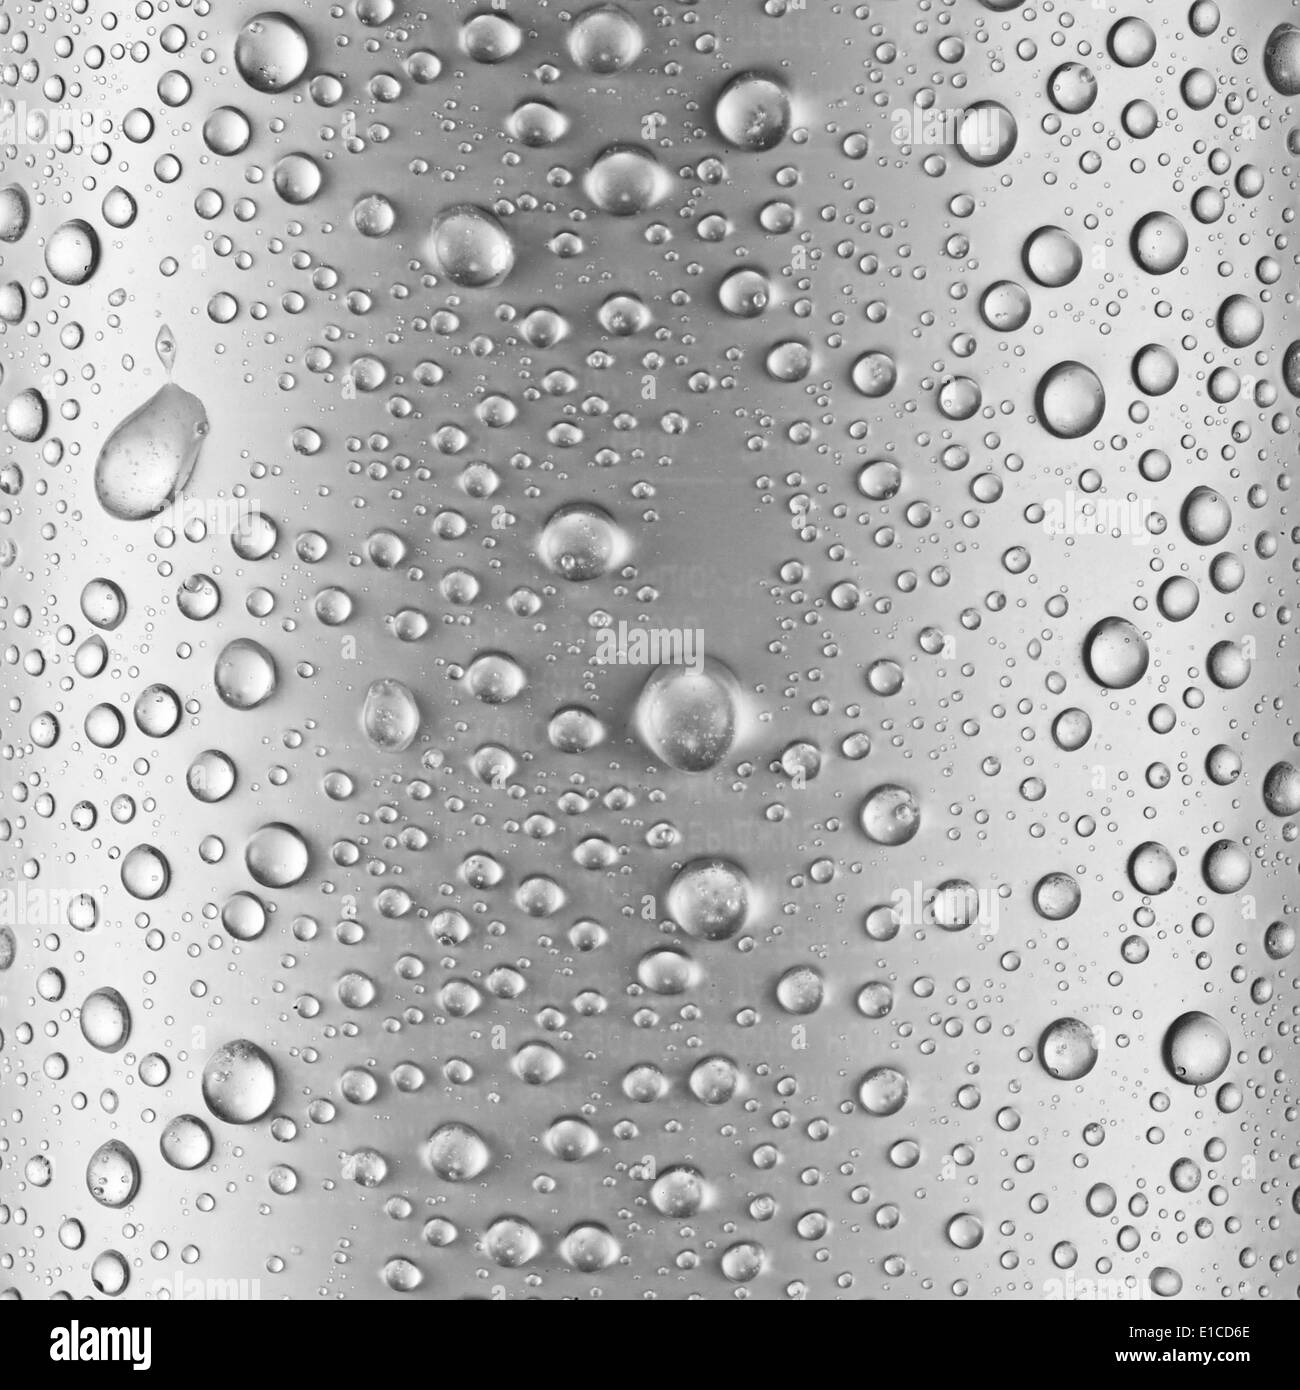 Water drops over gray glass background. Stock Photo